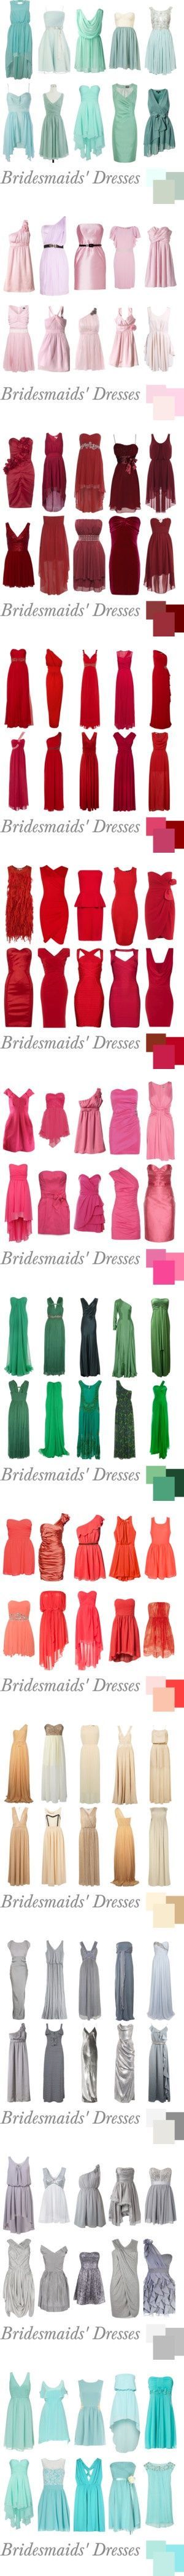 Found this awhile ago, it has tons of bridesmaids dress colors and styles, could